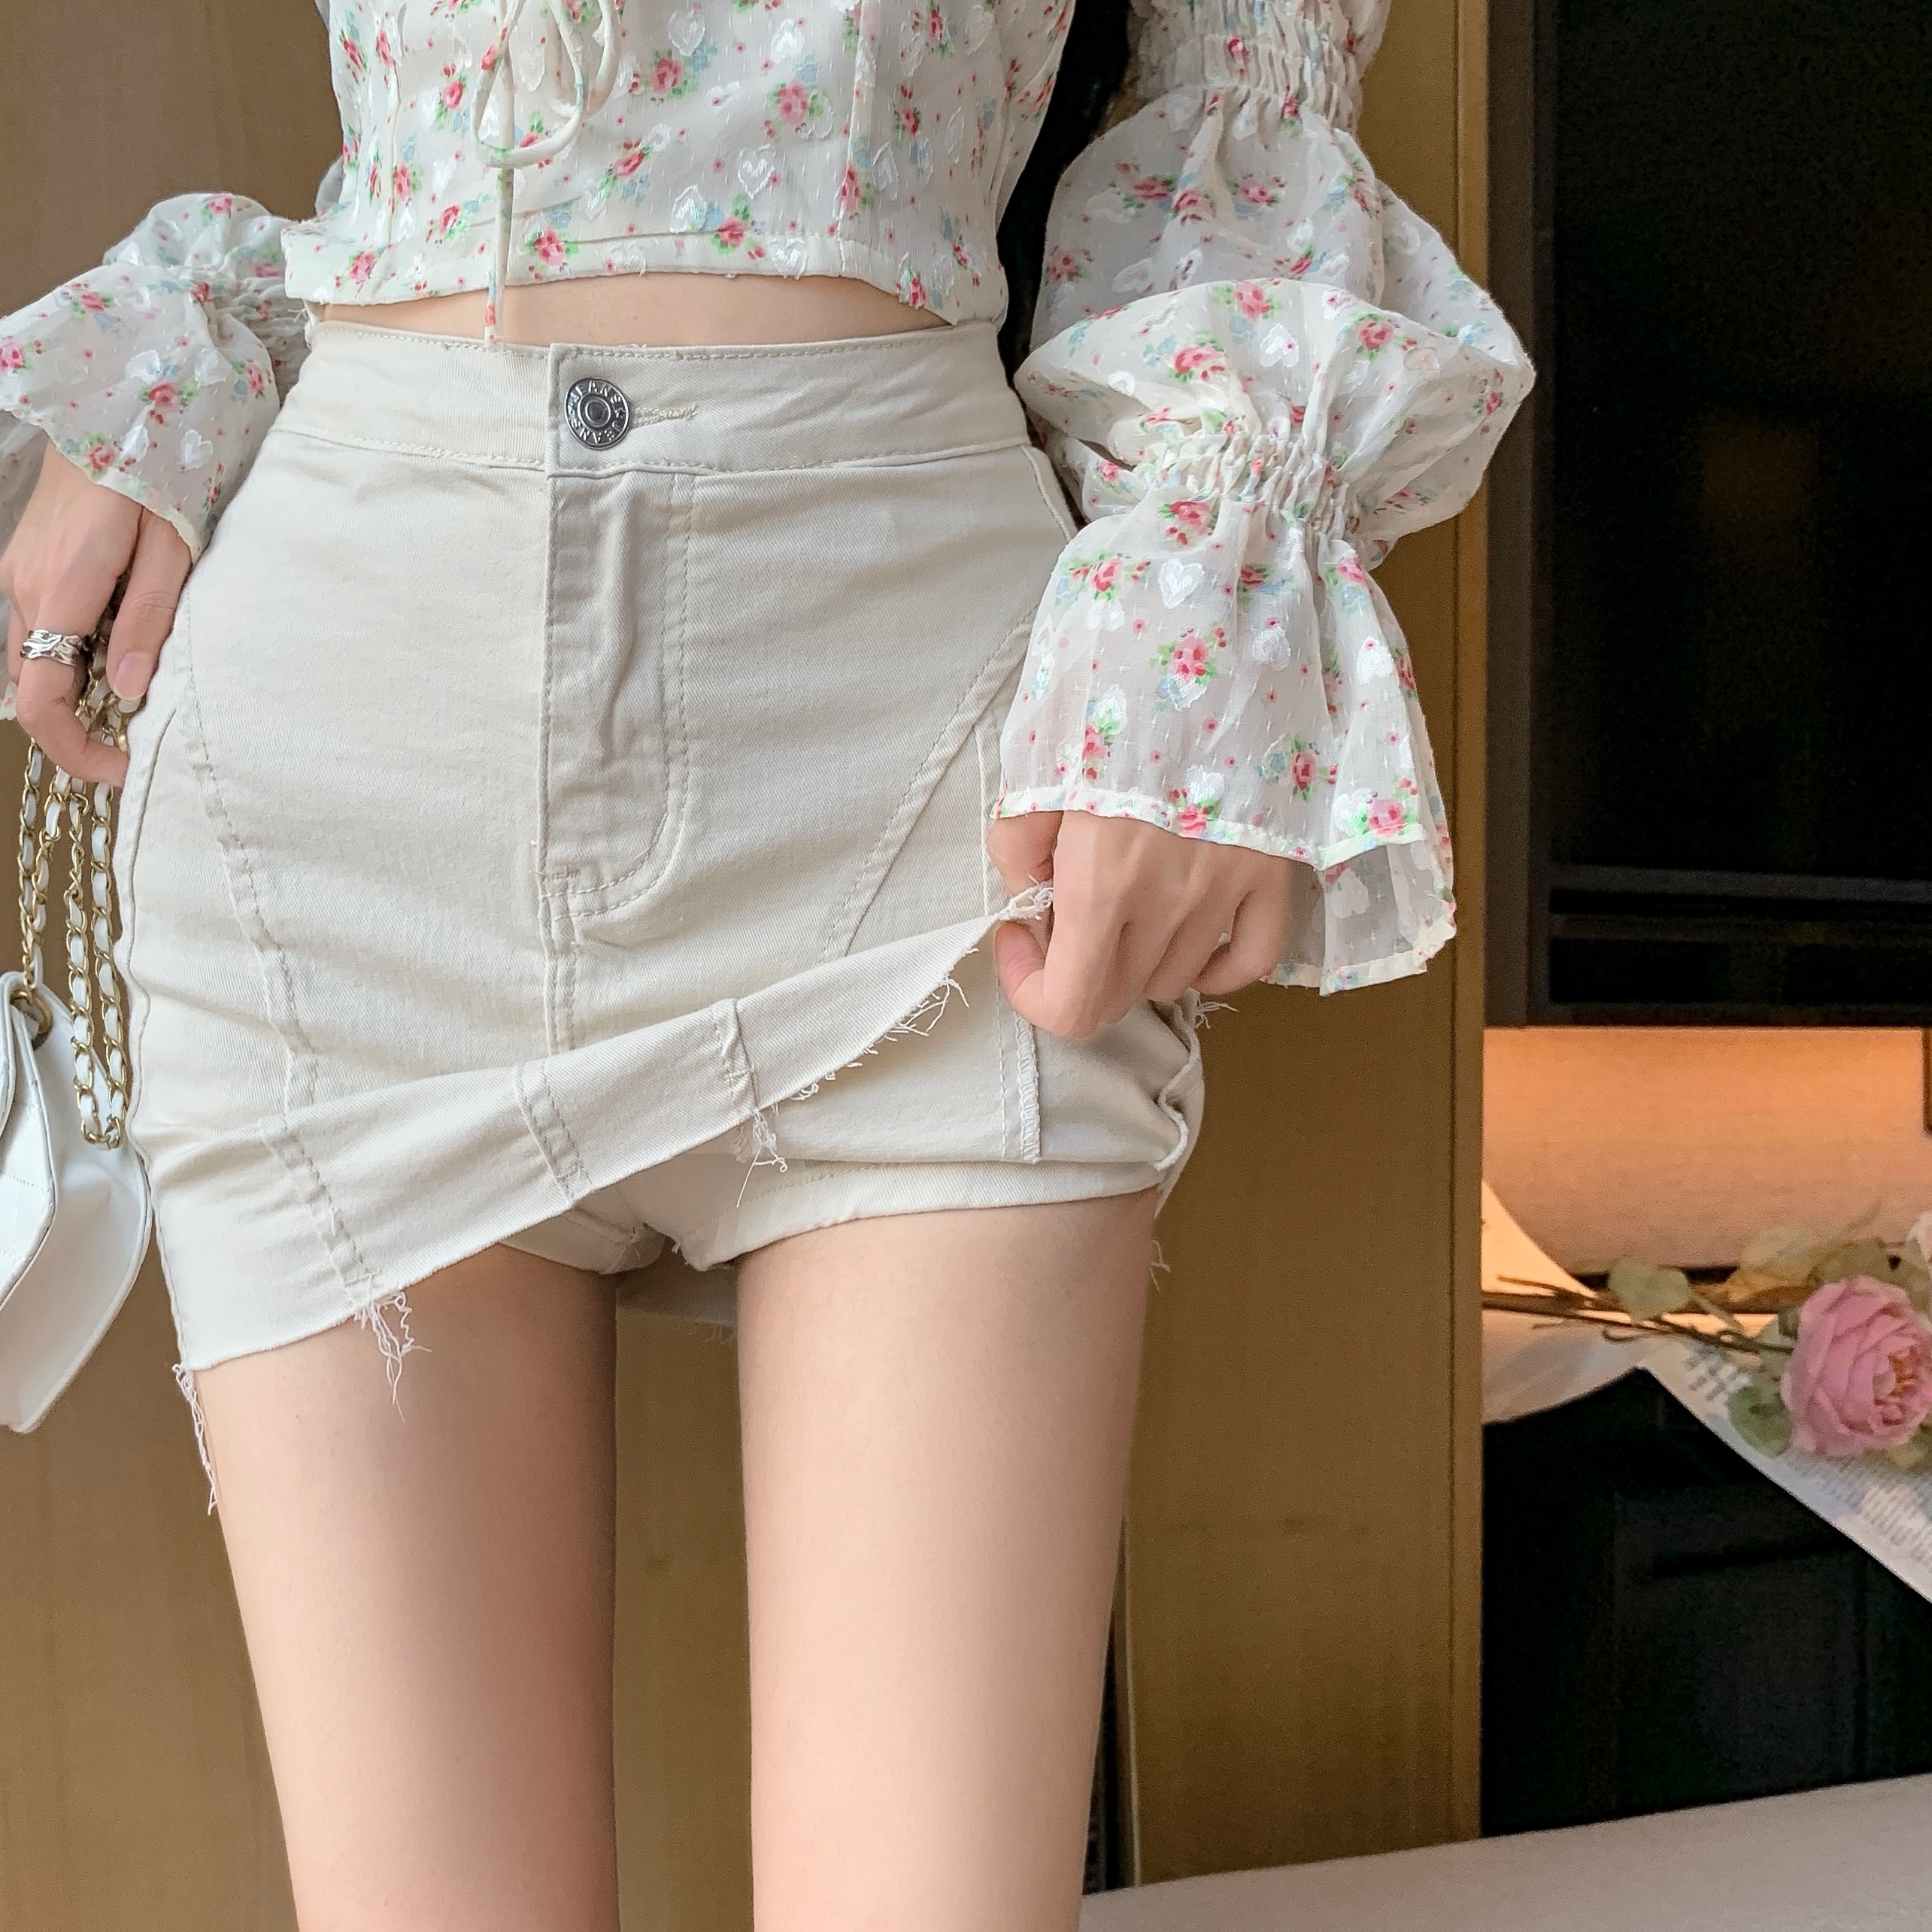 ~Hot girl pure lust style high-waisted short skirt women's summer elastic hip-covering anti-exposure culottes